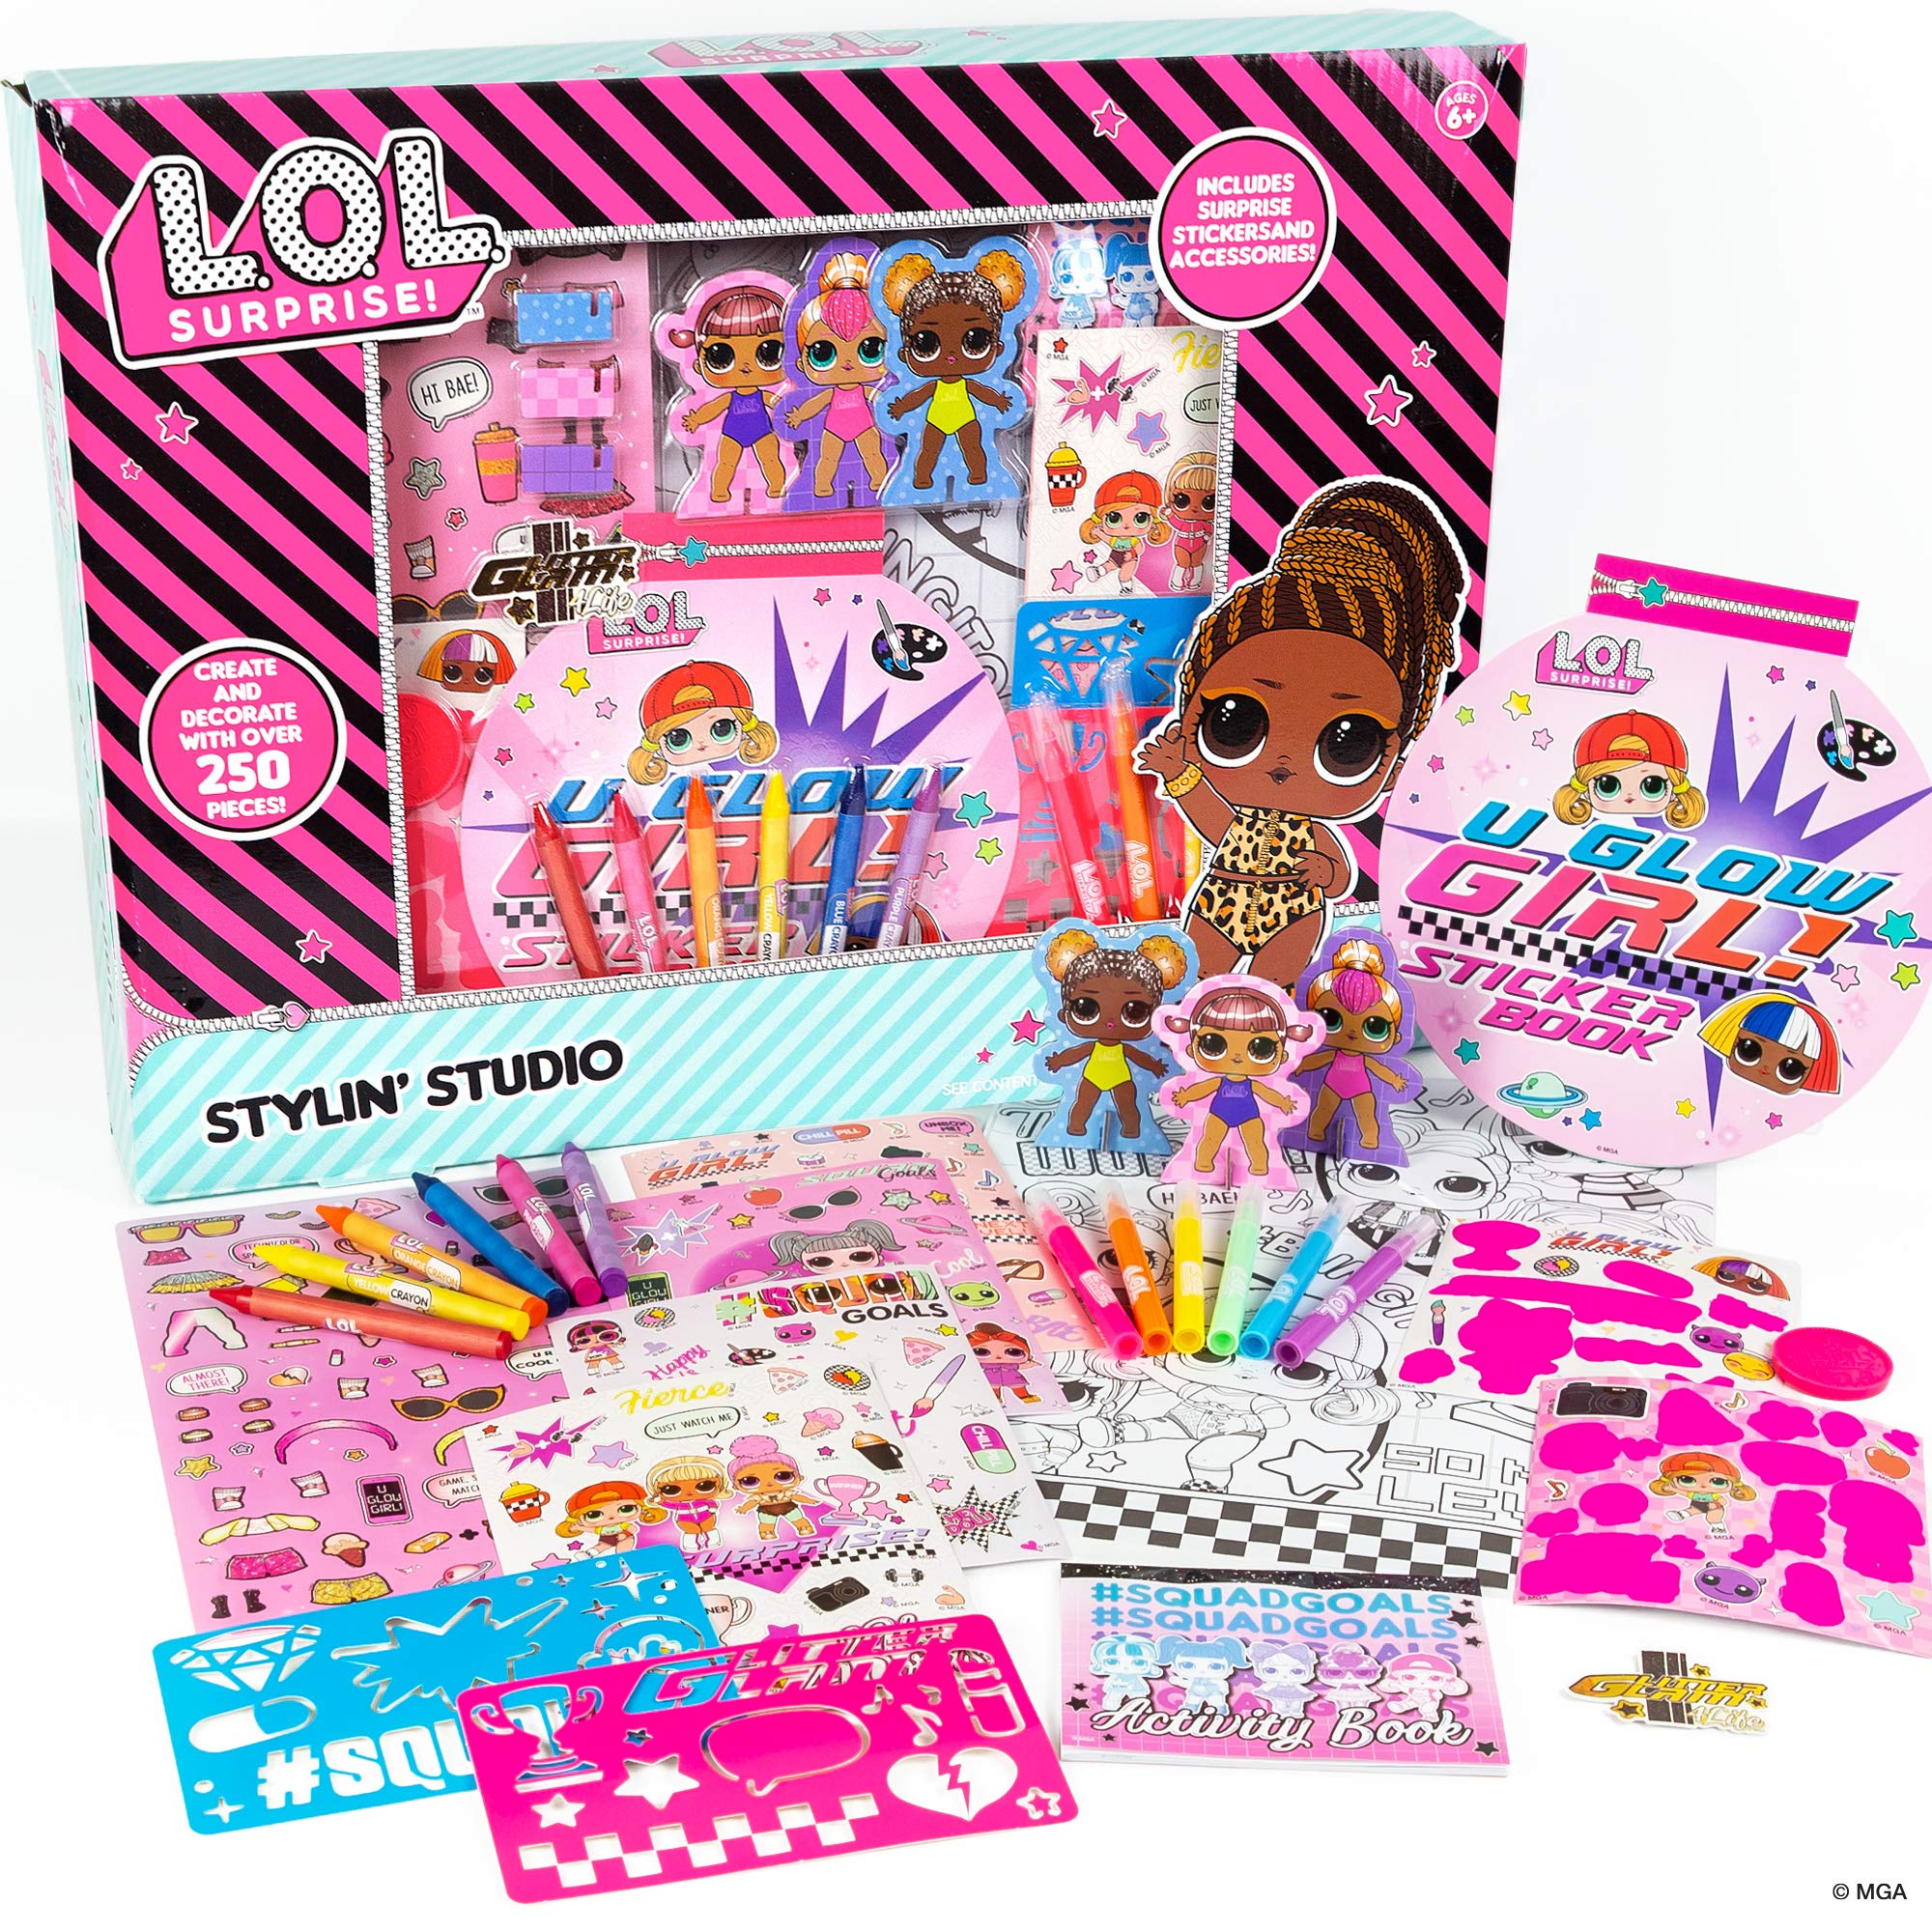 Book Cover L.O.L. Surprise! Stylin' Studio by Horizon Group USA,Decorate LOL Surprise Paper Dolls With 250+ Accessories,Includes DIY Activity Book, Scratch Art,Sticker Sheet,Coloring Pages,Markers,Crayons & More